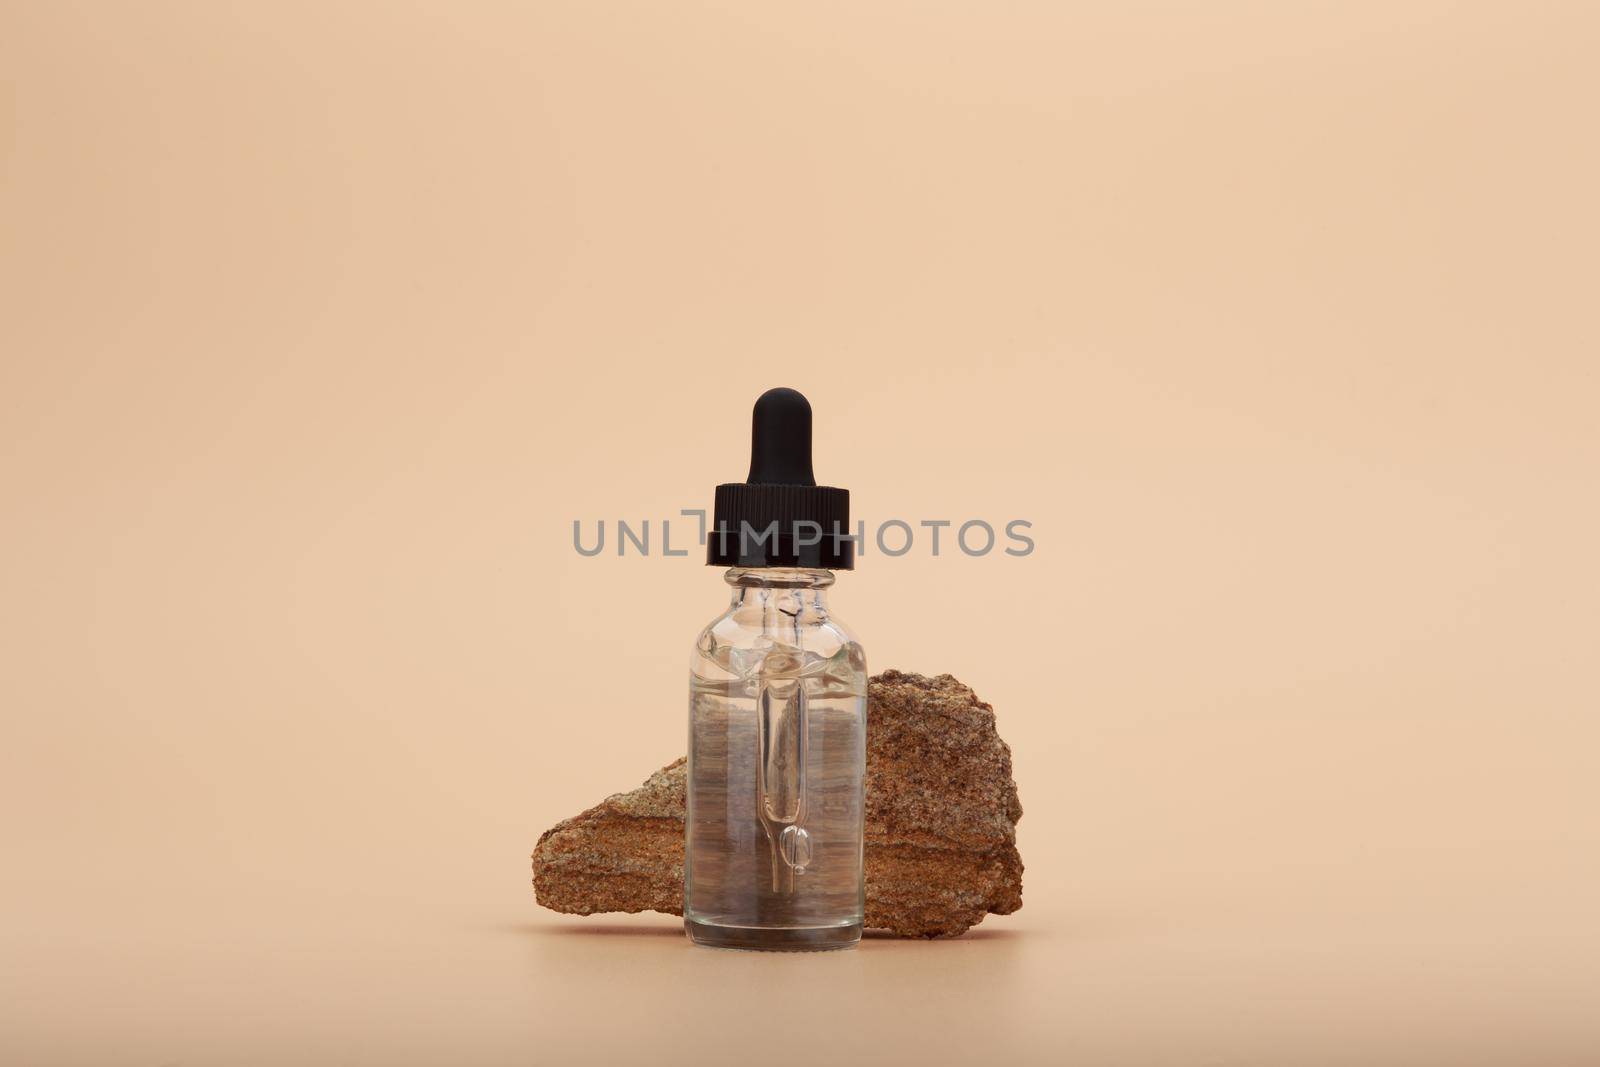 Transparent skin serum bottle next to natural stone against bright beige background with copy space by Senorina_Irina